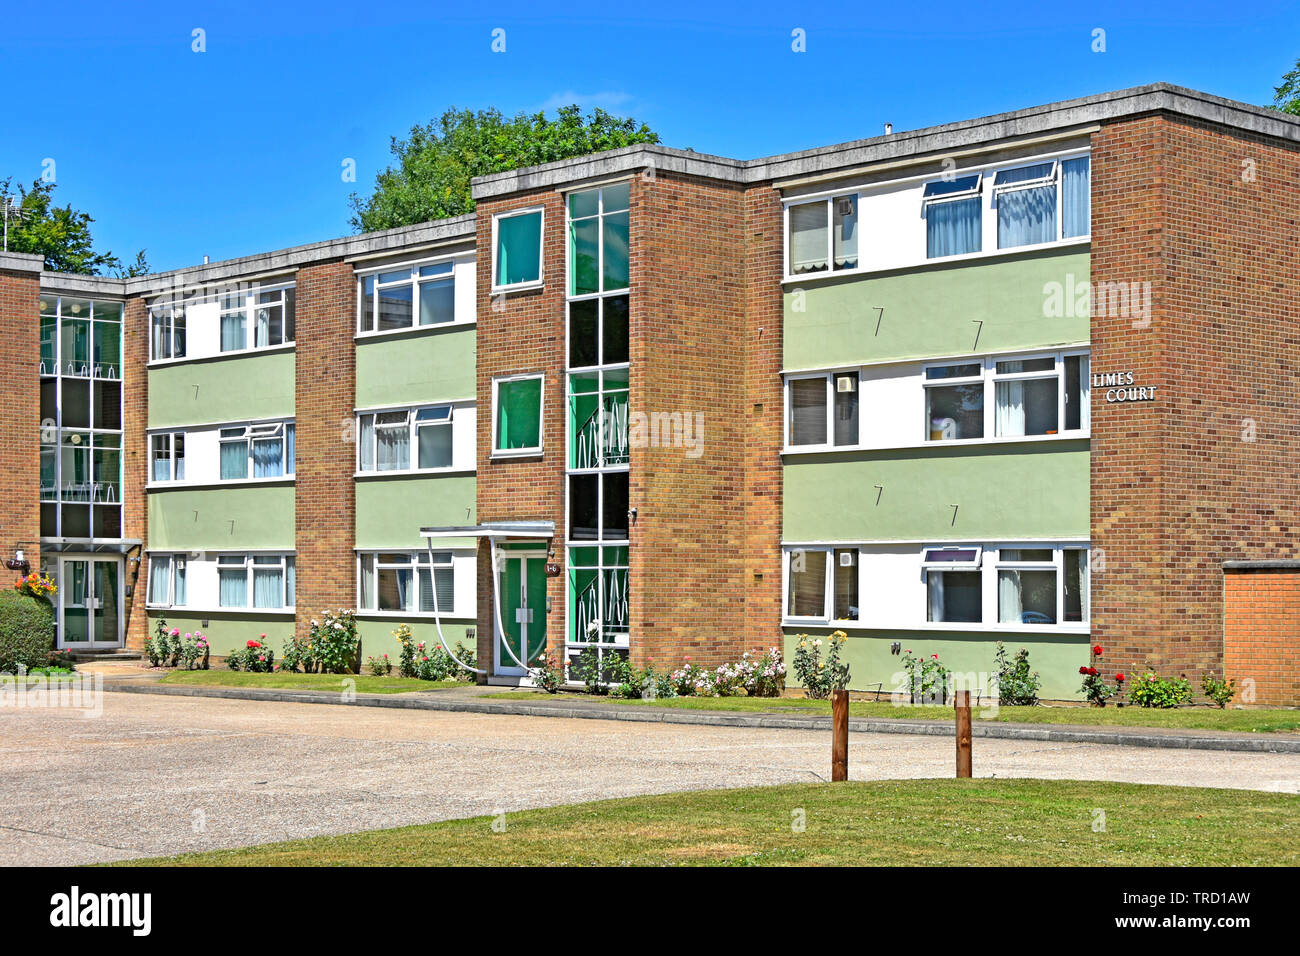 Exterior small block of flat type apartment homes brickwork housing property with window infill panels & central entrance staircase Essex England UK Stock Photo